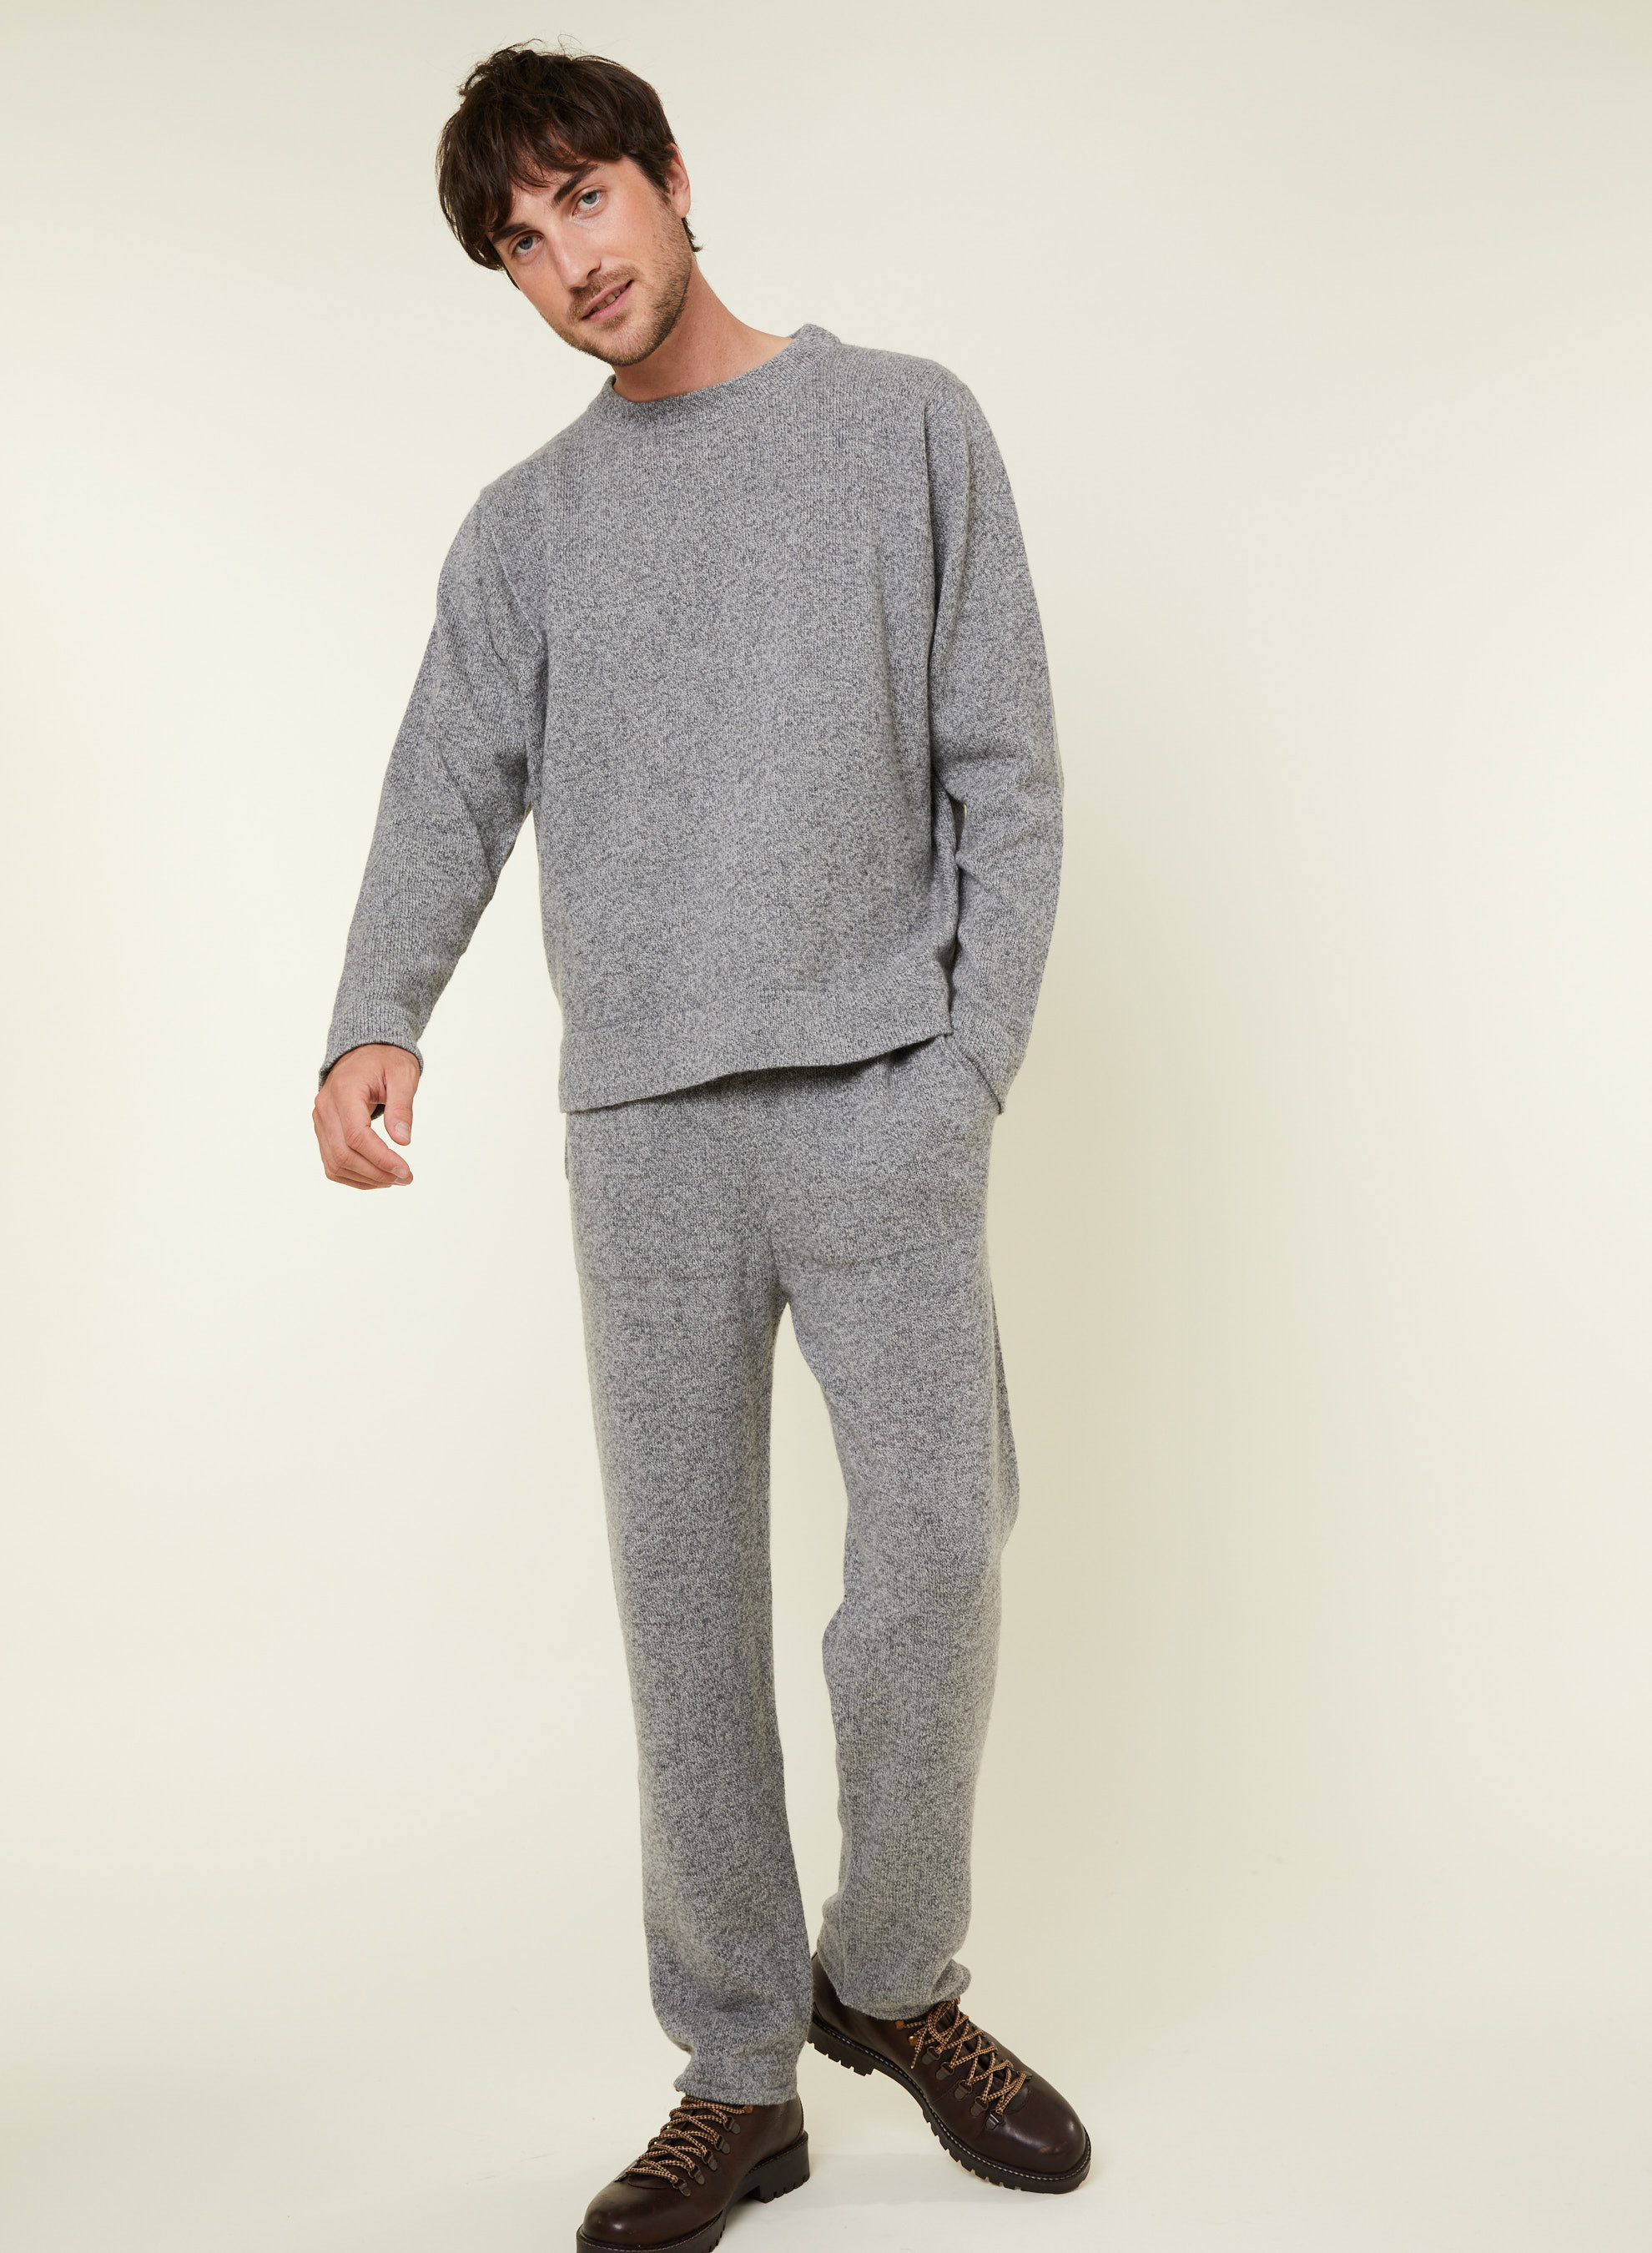 https://montagut.jp/30538-thickbox_default/pants-with-pockets-in-wool-and-cashmere-fabri.jpg